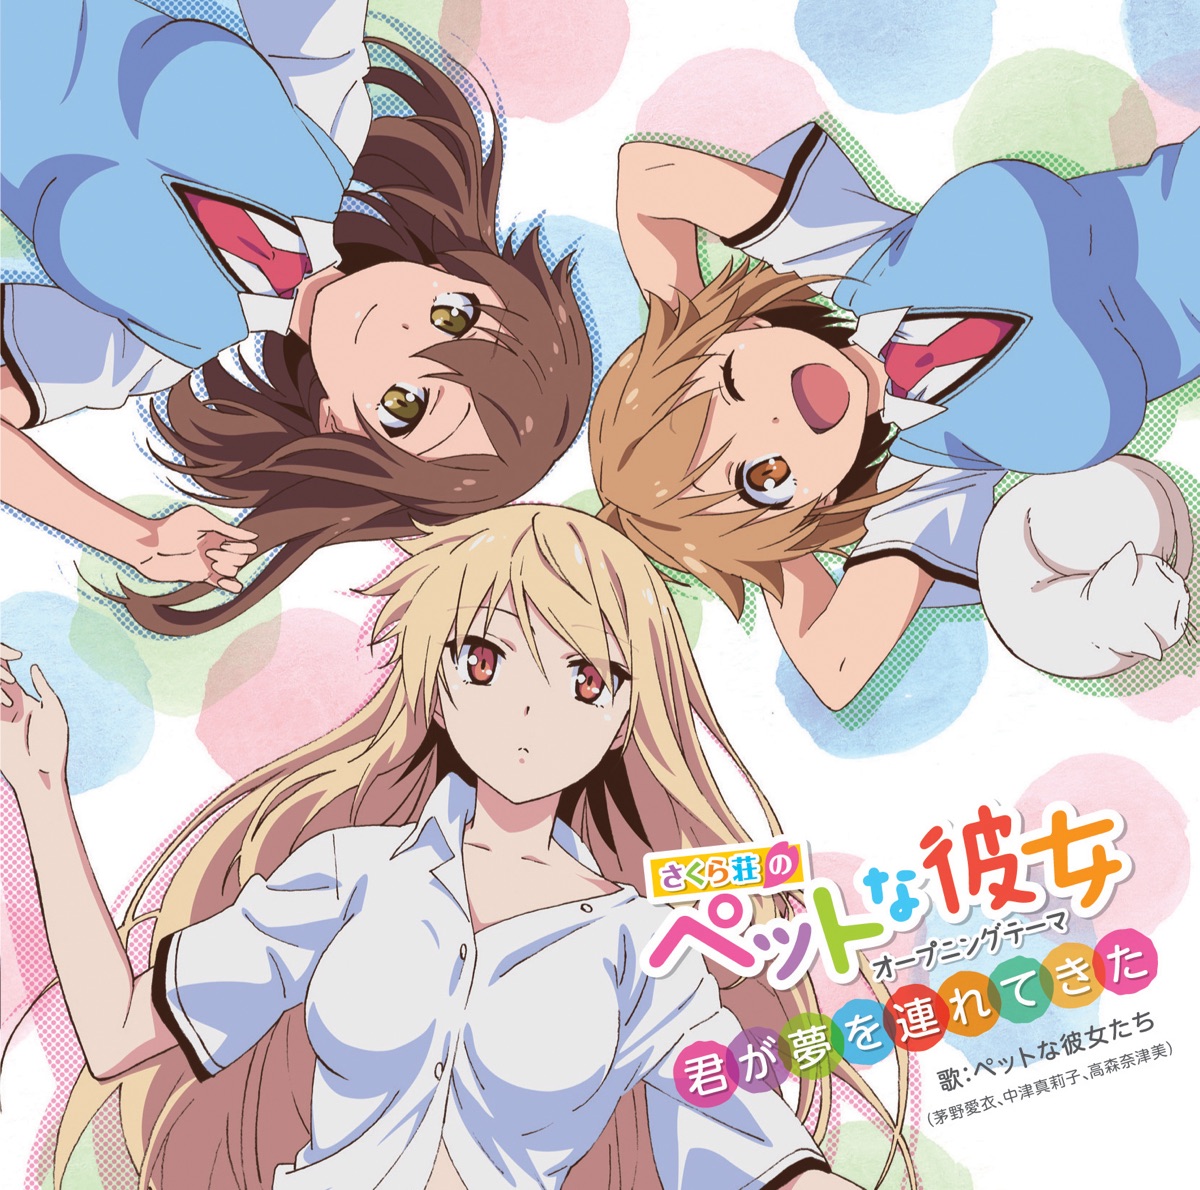 Cover art for『Pet na Kanojotachi - 君が夢を連れてきた』from the release『君が夢を連れてきた 